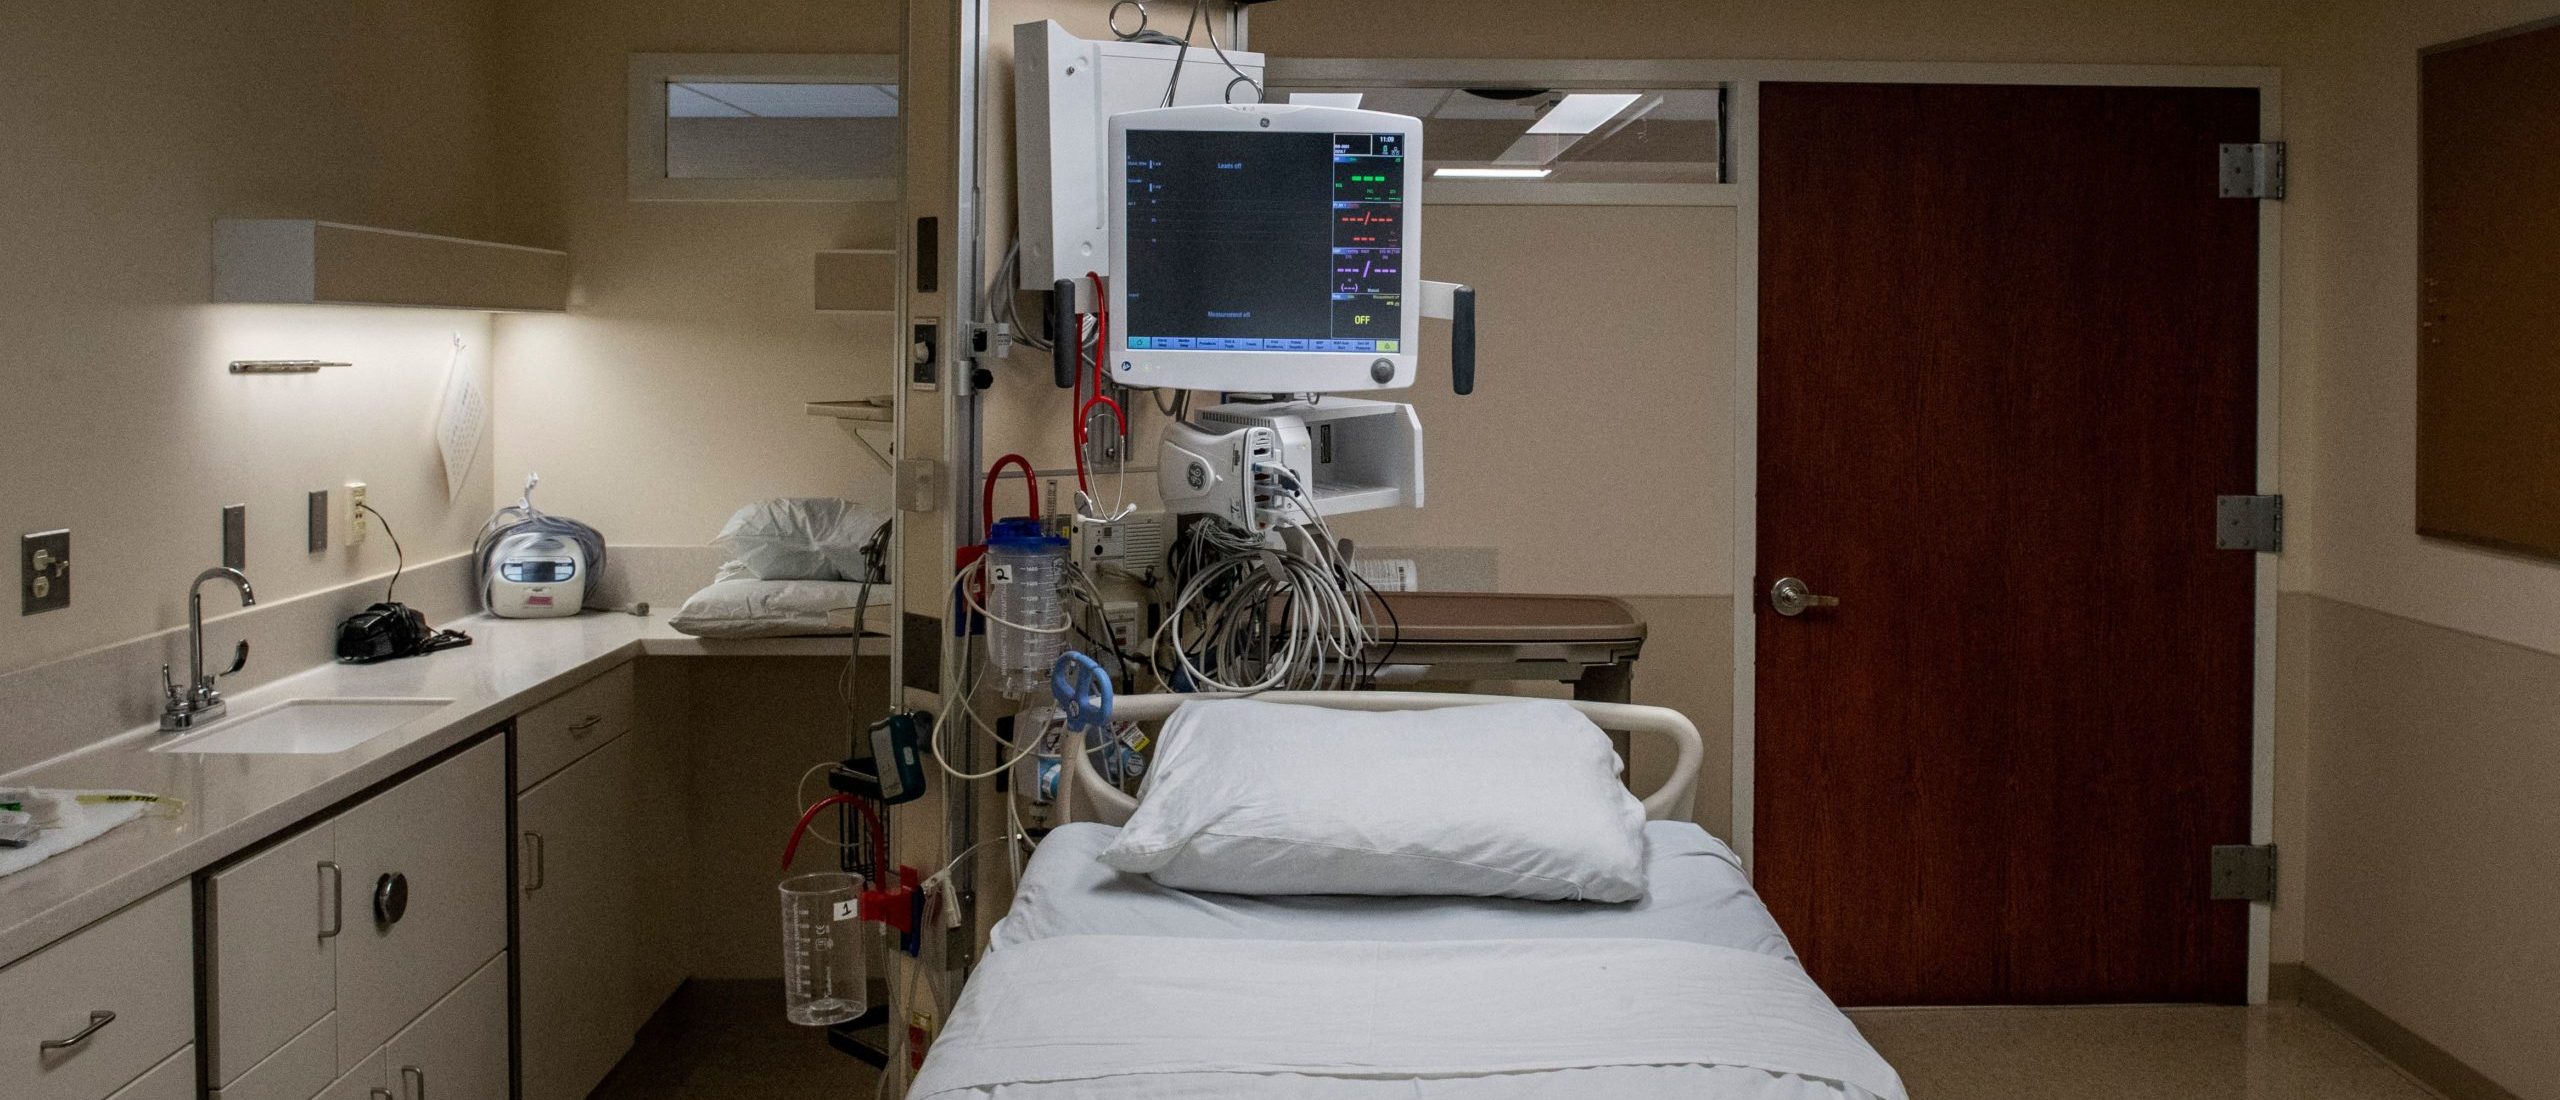 A empty bed where a patient with Covid-19 died earlier in the day waits to be filled with a new patient in the ICU at Hartford Hospital in Hartford, Connecticut, on January 18, 2022. (Photo by JOSEPH PREZIOSO/AFP via Getty Images)